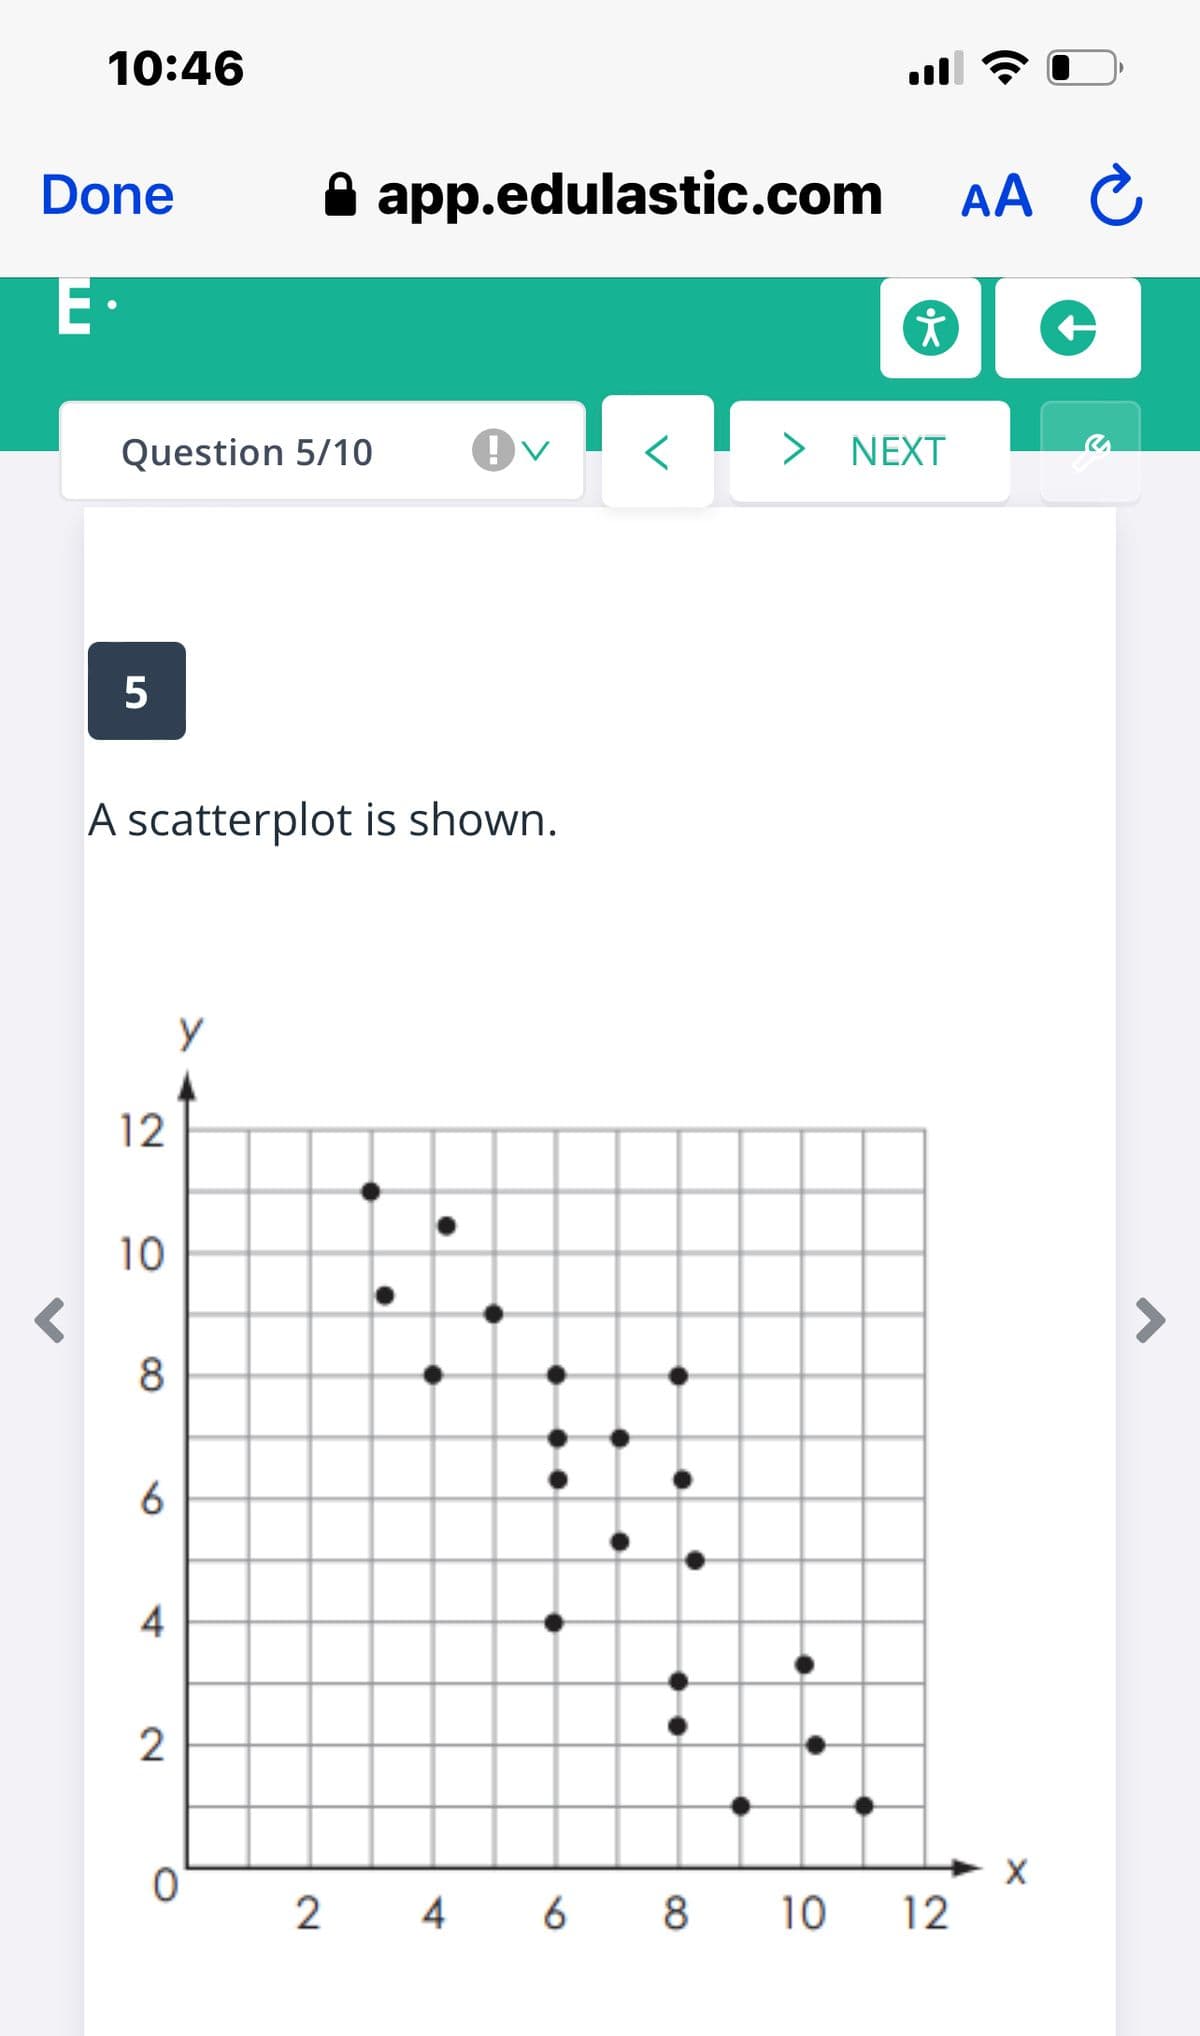 10:46
ll
Done
app.edulastic.com
AA C
E·
Question 5/10
> NEXT
A scatterplot is shown.
12
10
8
4
2 4 6 8 10
12
